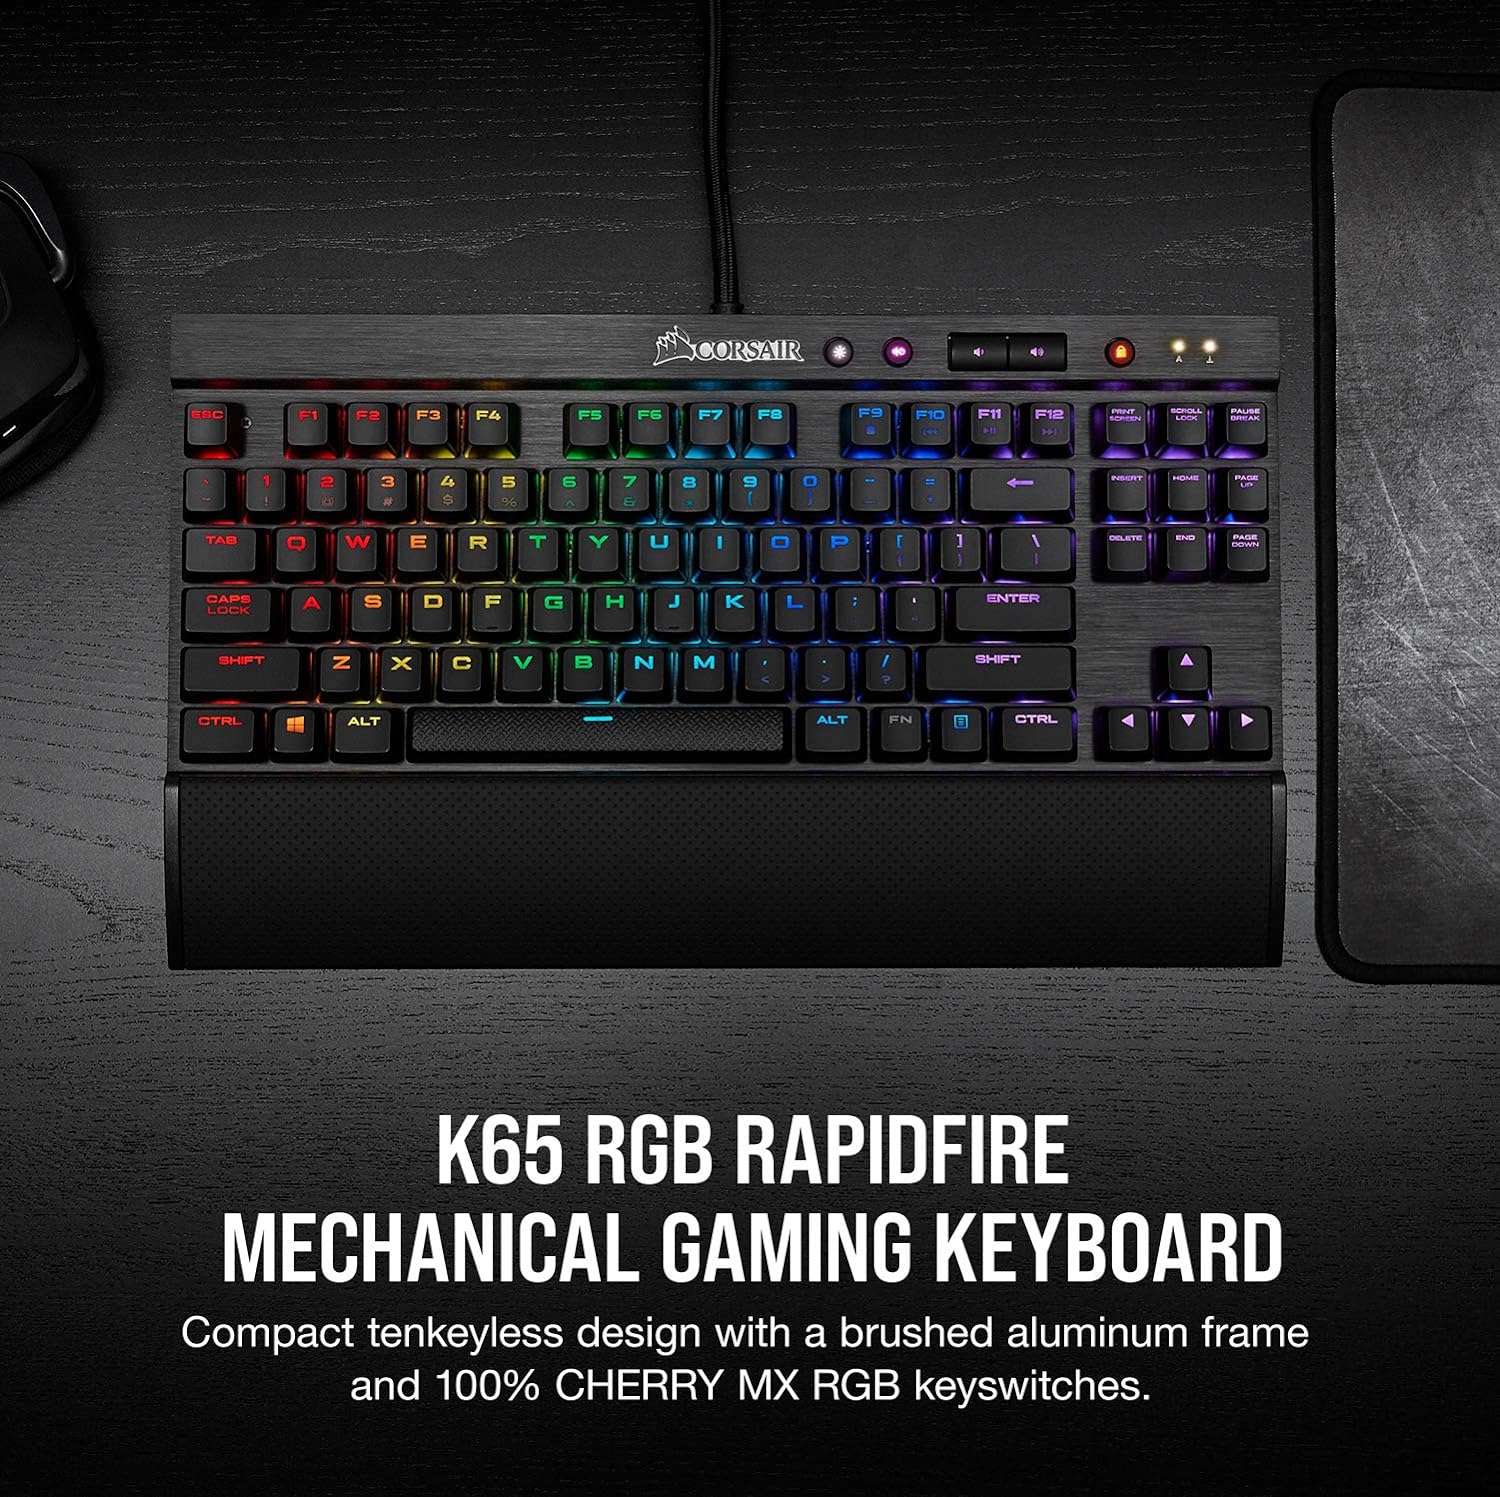 Compact Corsair K65 RGB Rapidfire Keyboard - Anti-ghosting, full key rollover, and durable aluminum frame. 0843591082181